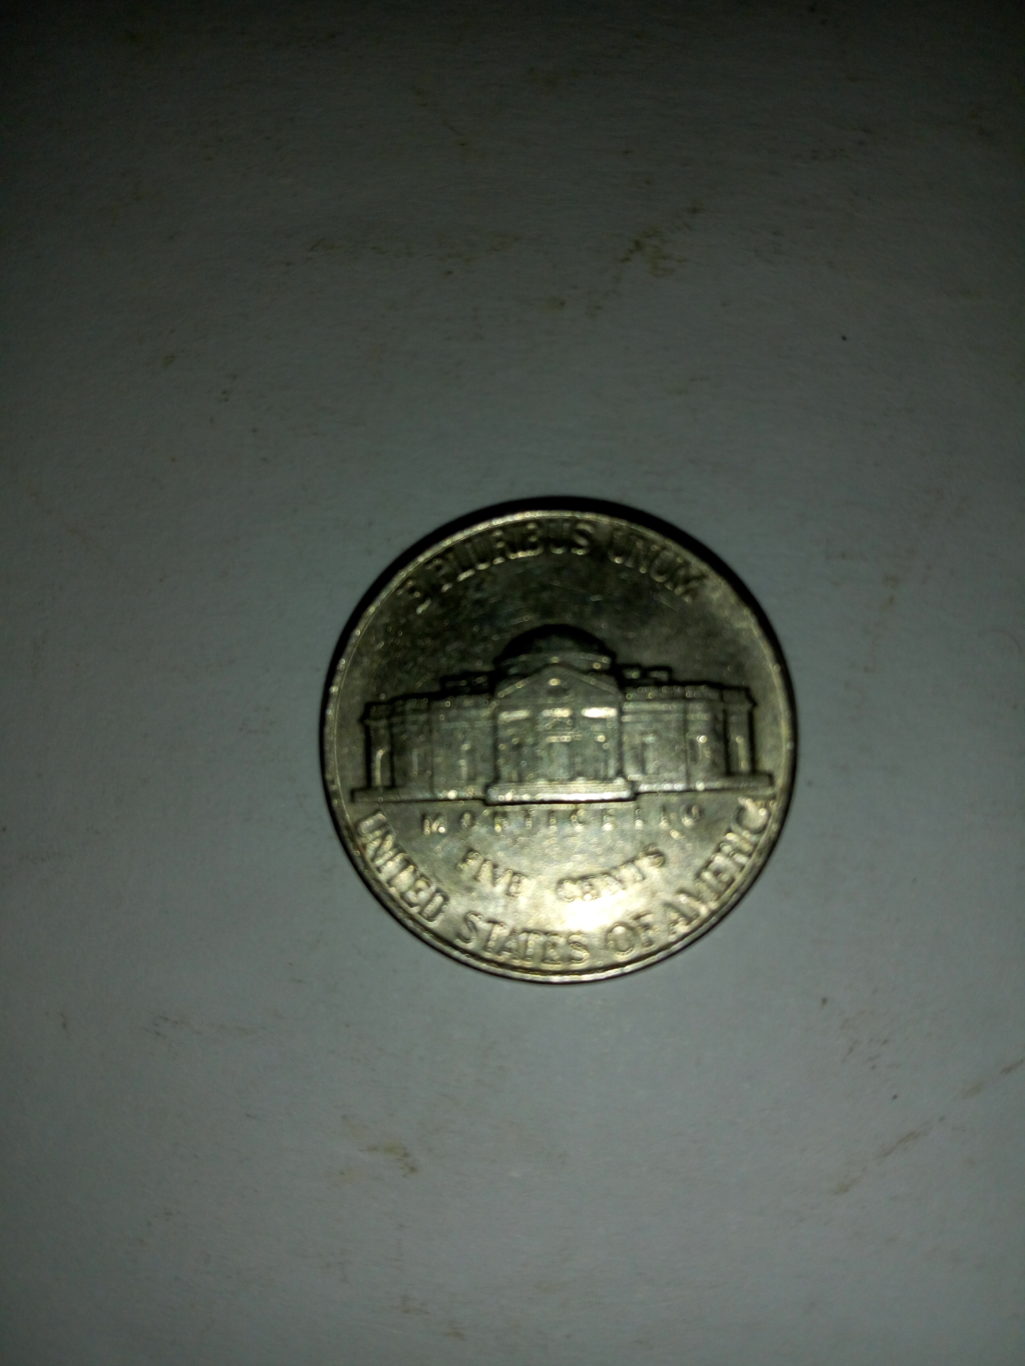 1995_united States of America 5 cents